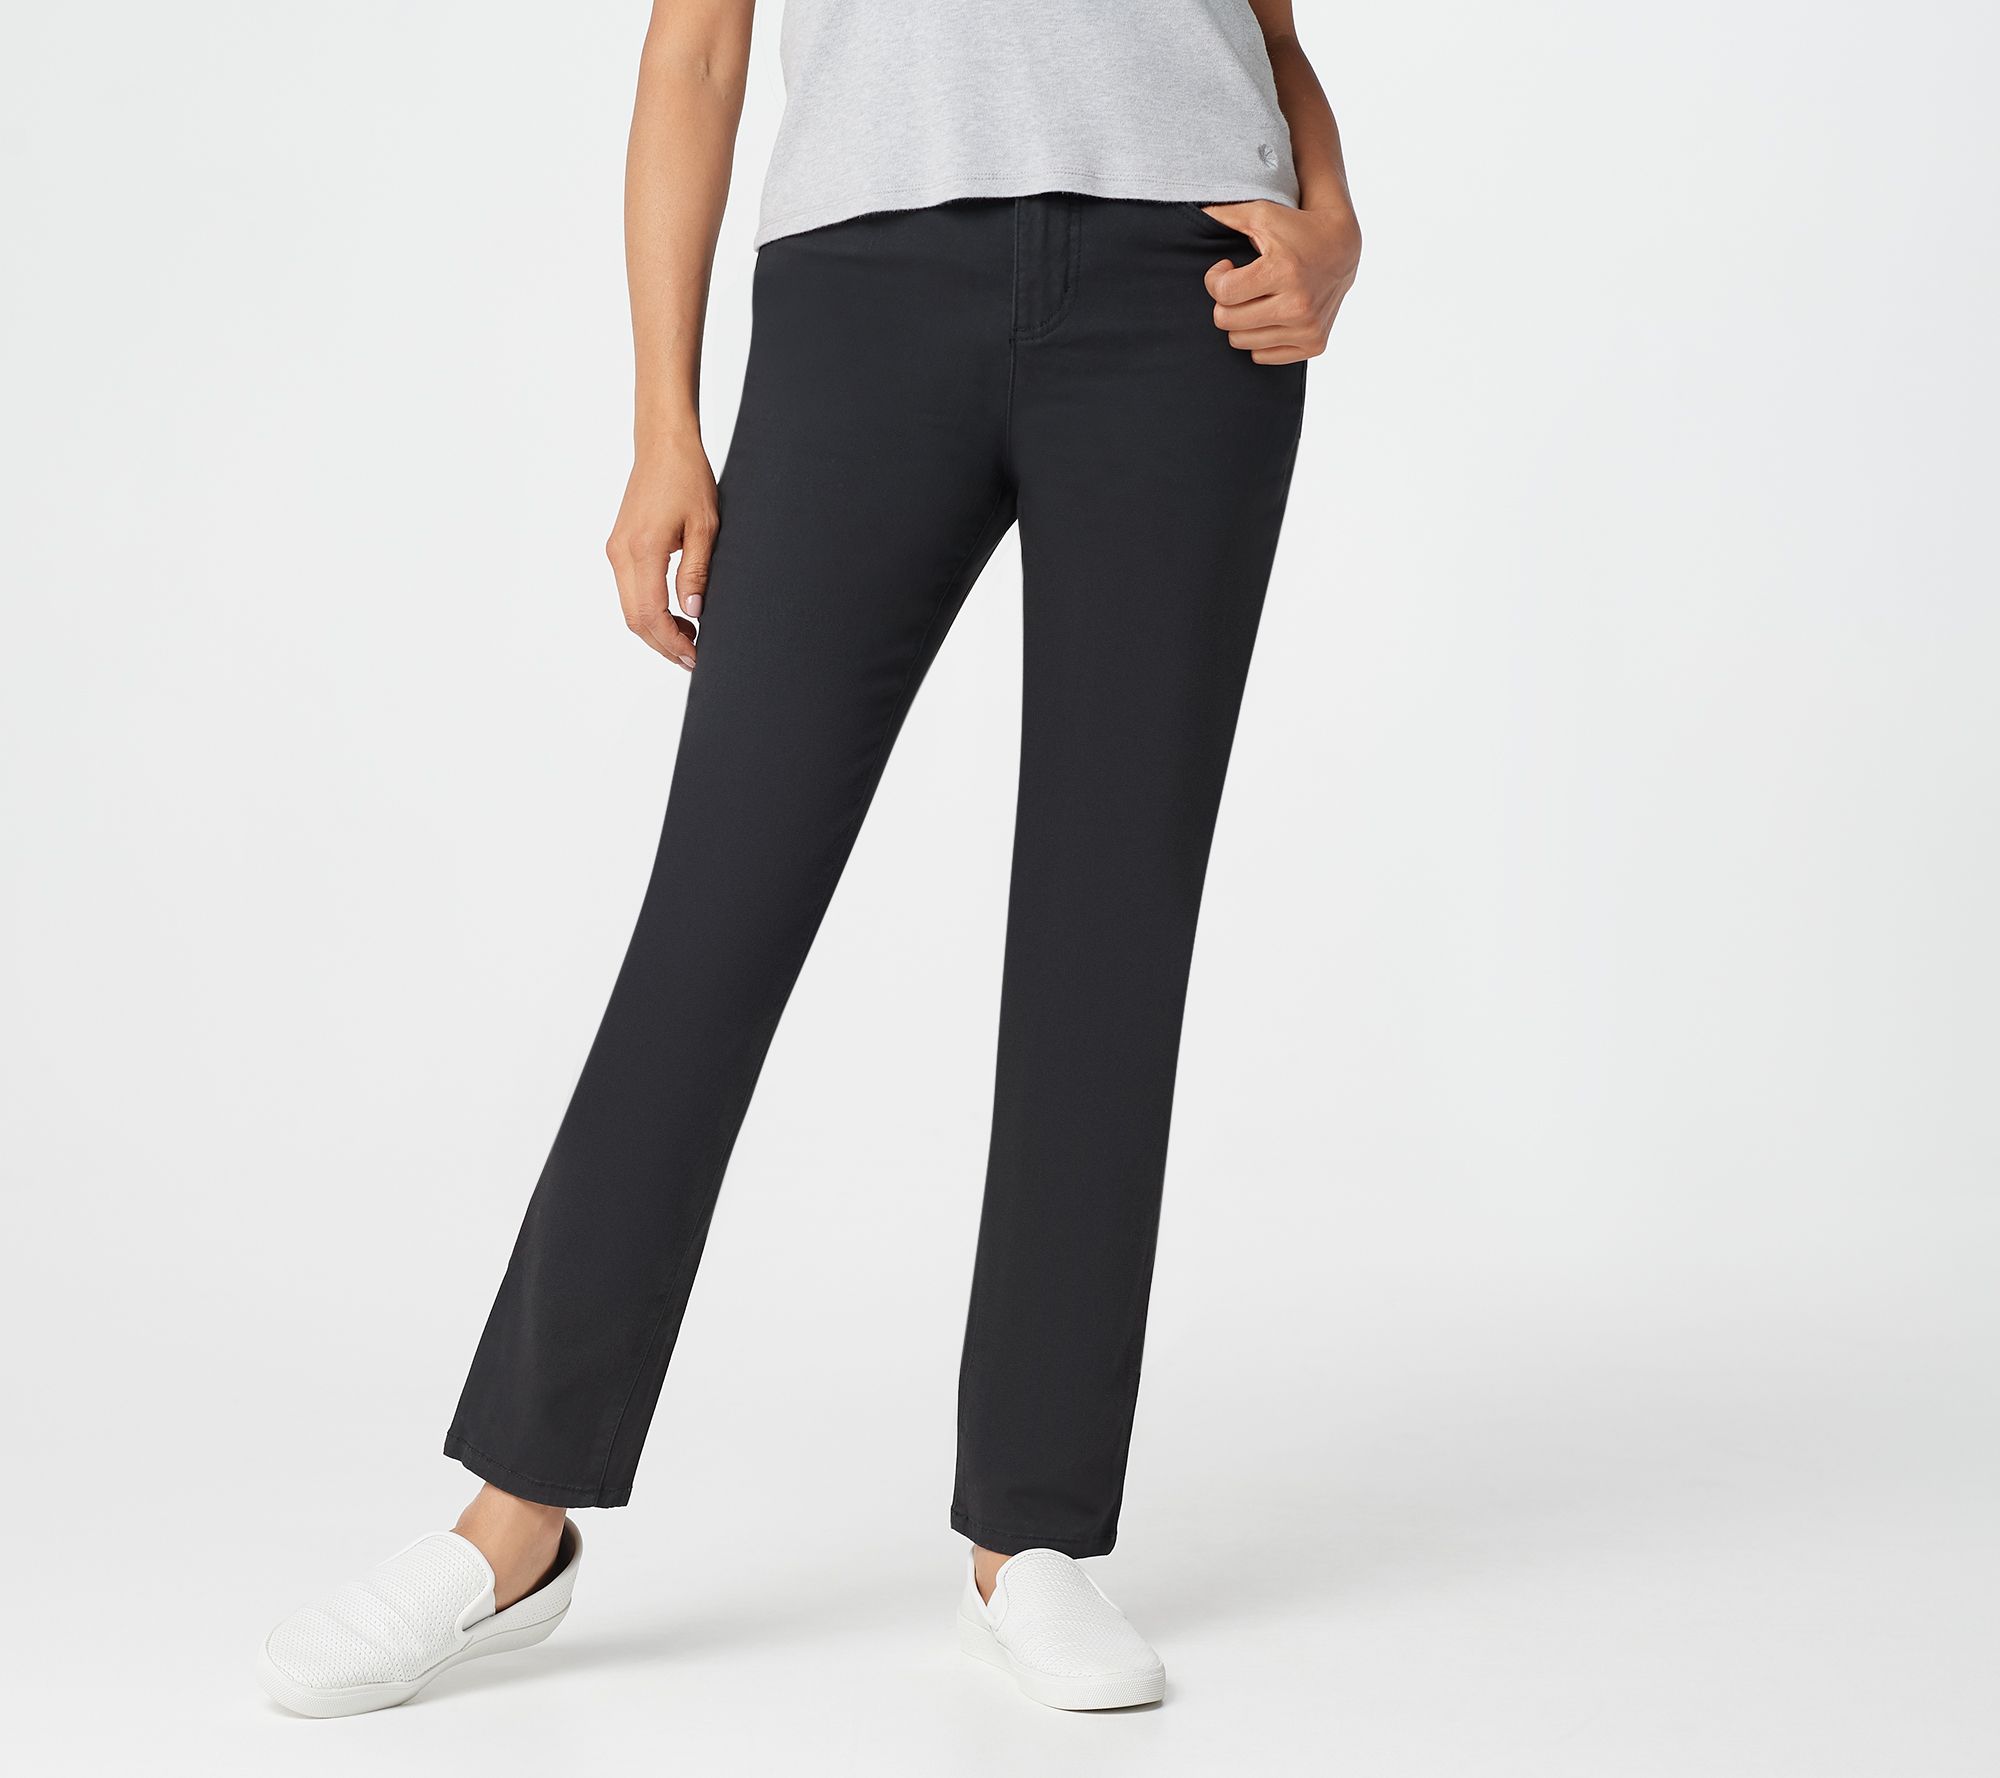 qvc denim and co jeans